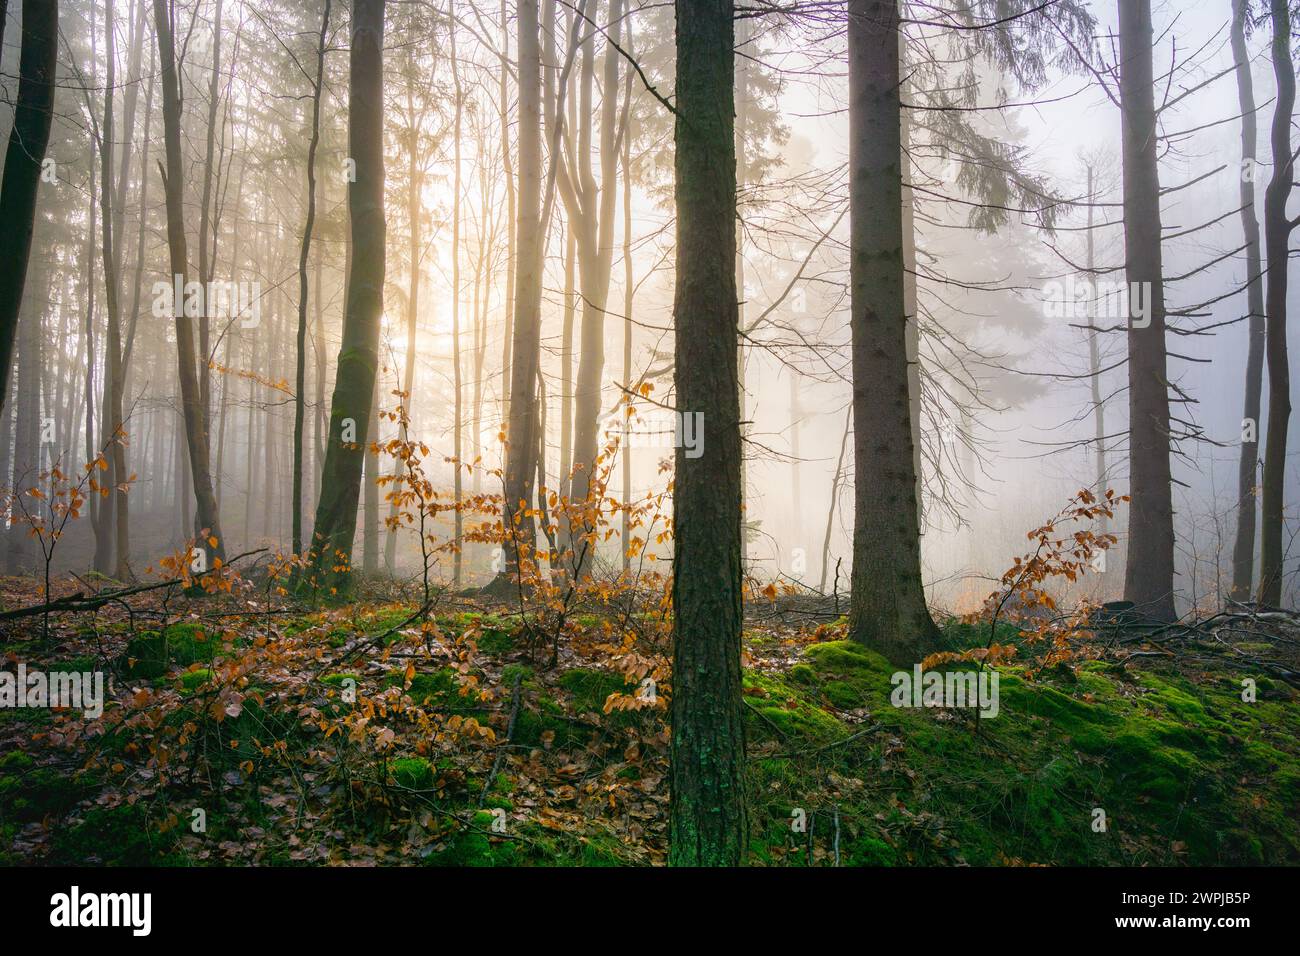 An atmospheric image depicting a serene forest landscape bathed in the golden glow of morning mist Stock Photo